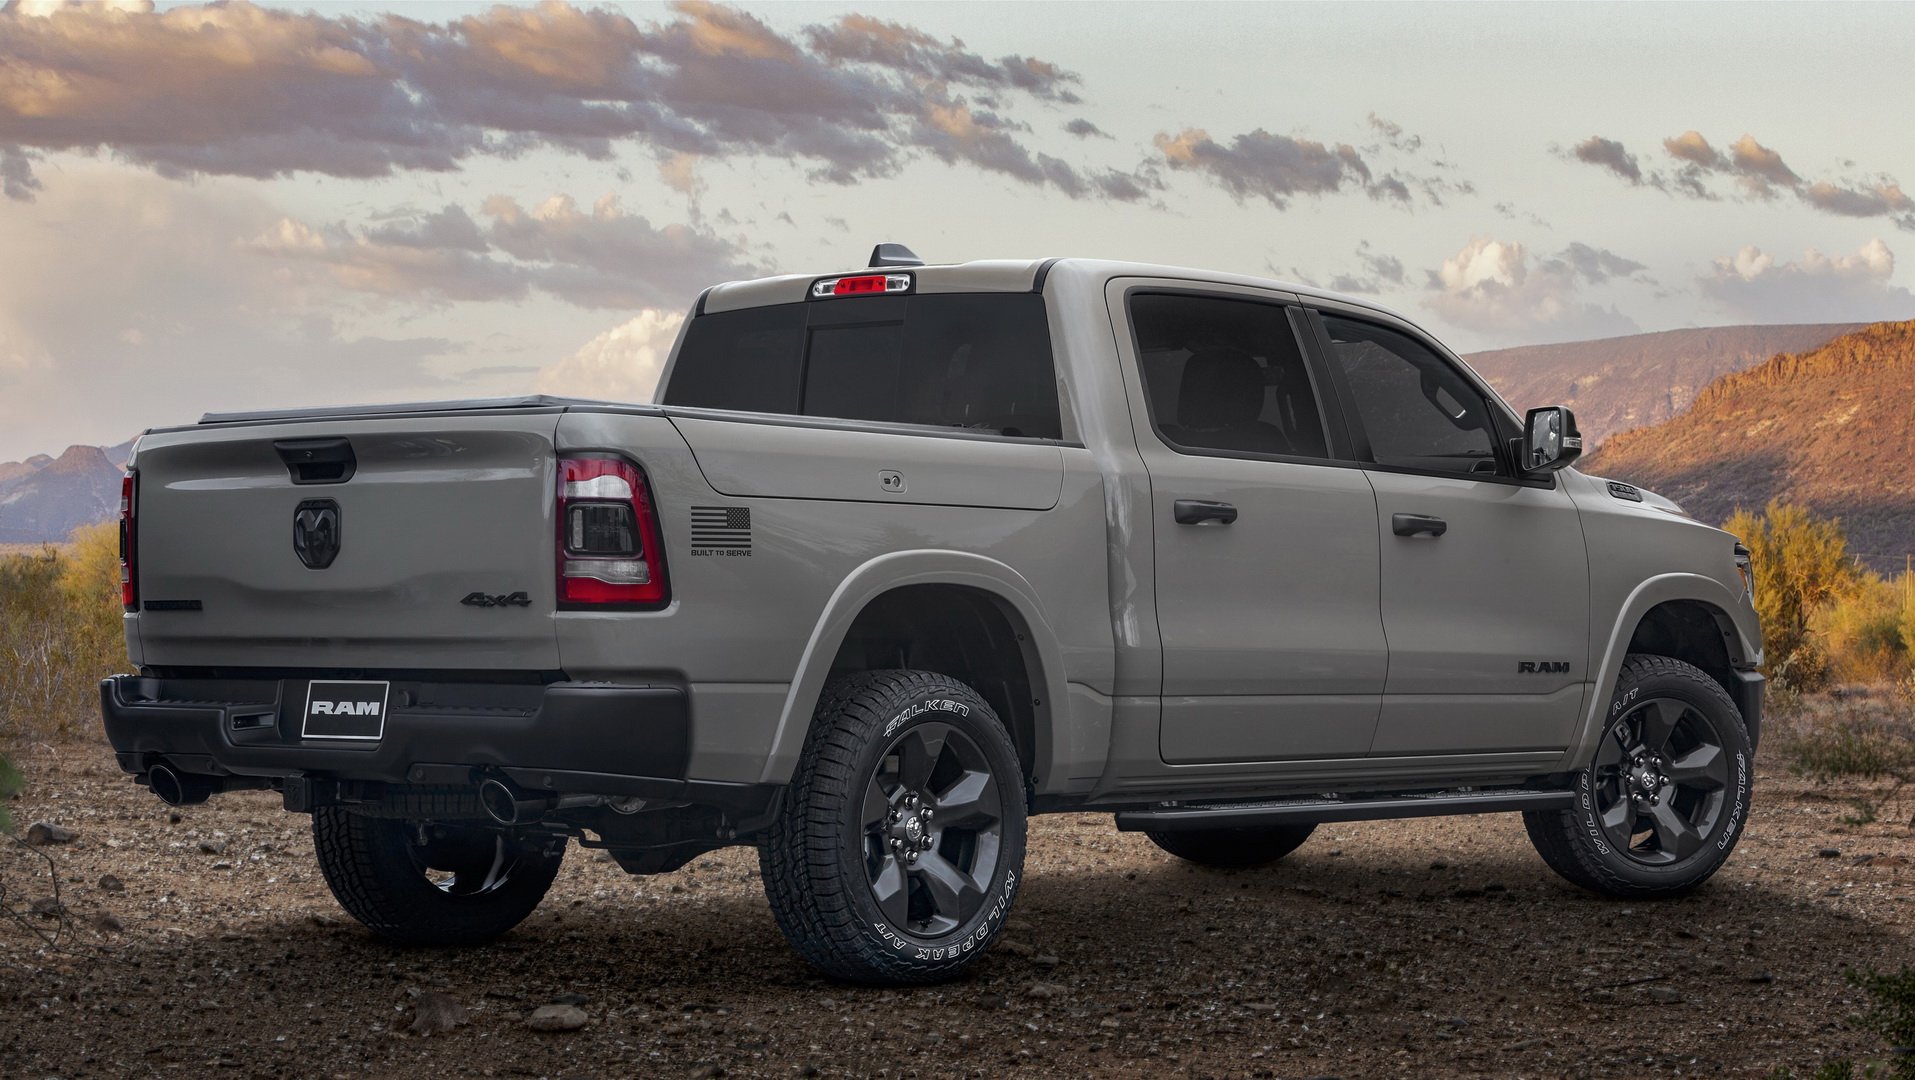 Ram 1500 "Built to Serve" Honors All U.S. Military Branches But Space